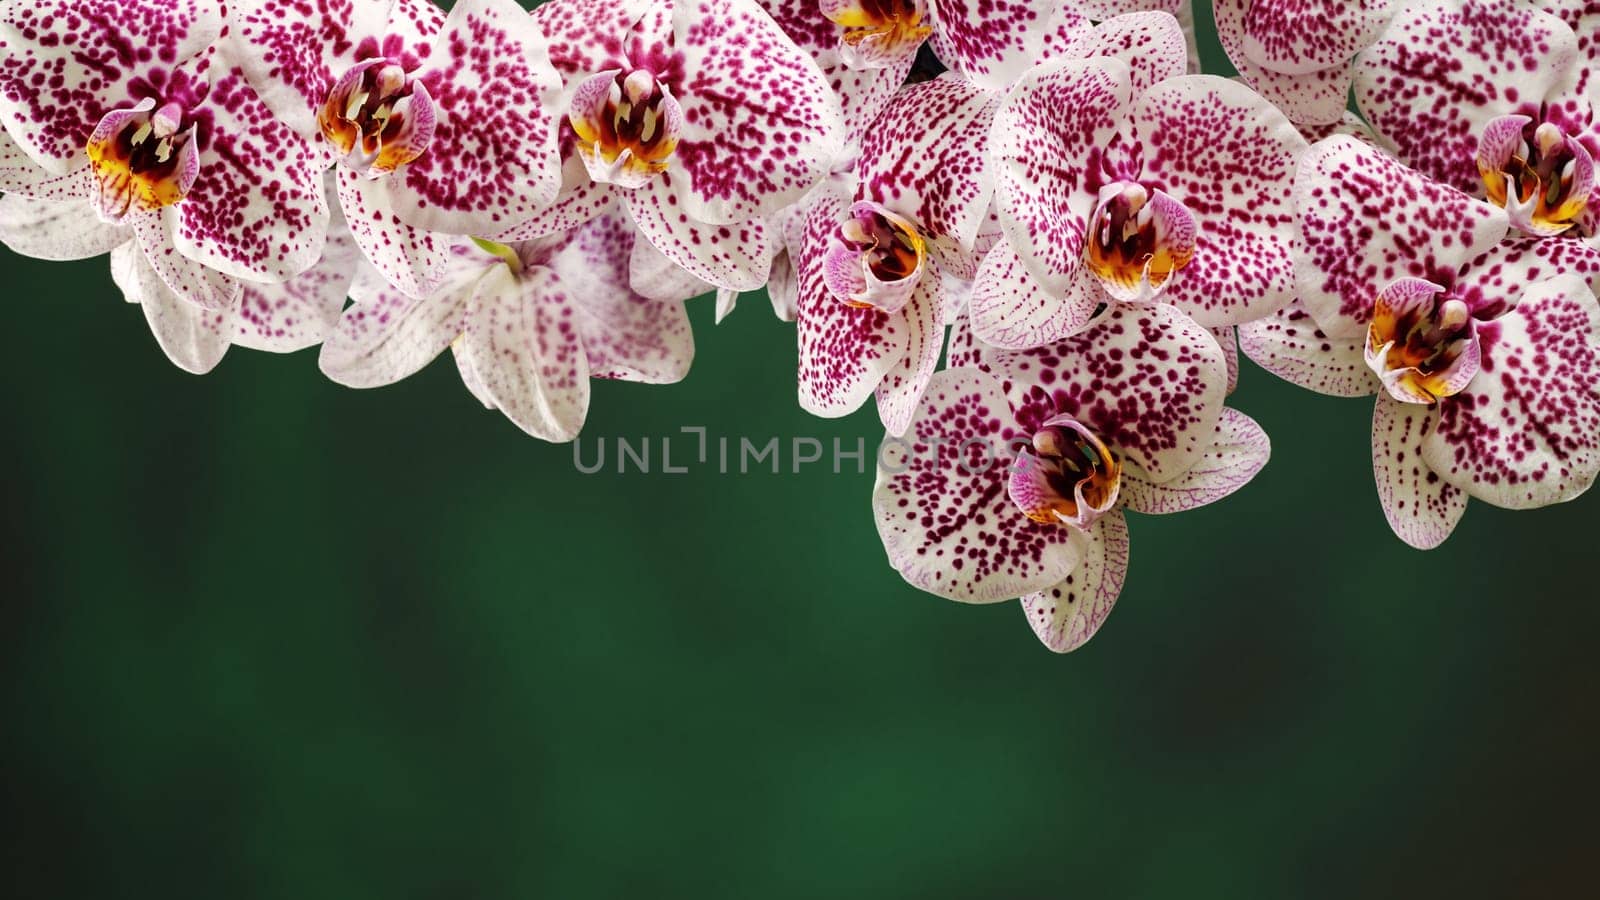 Branch of pink phalaenopsis or Moth orchid from isolated on green background by Lincikas